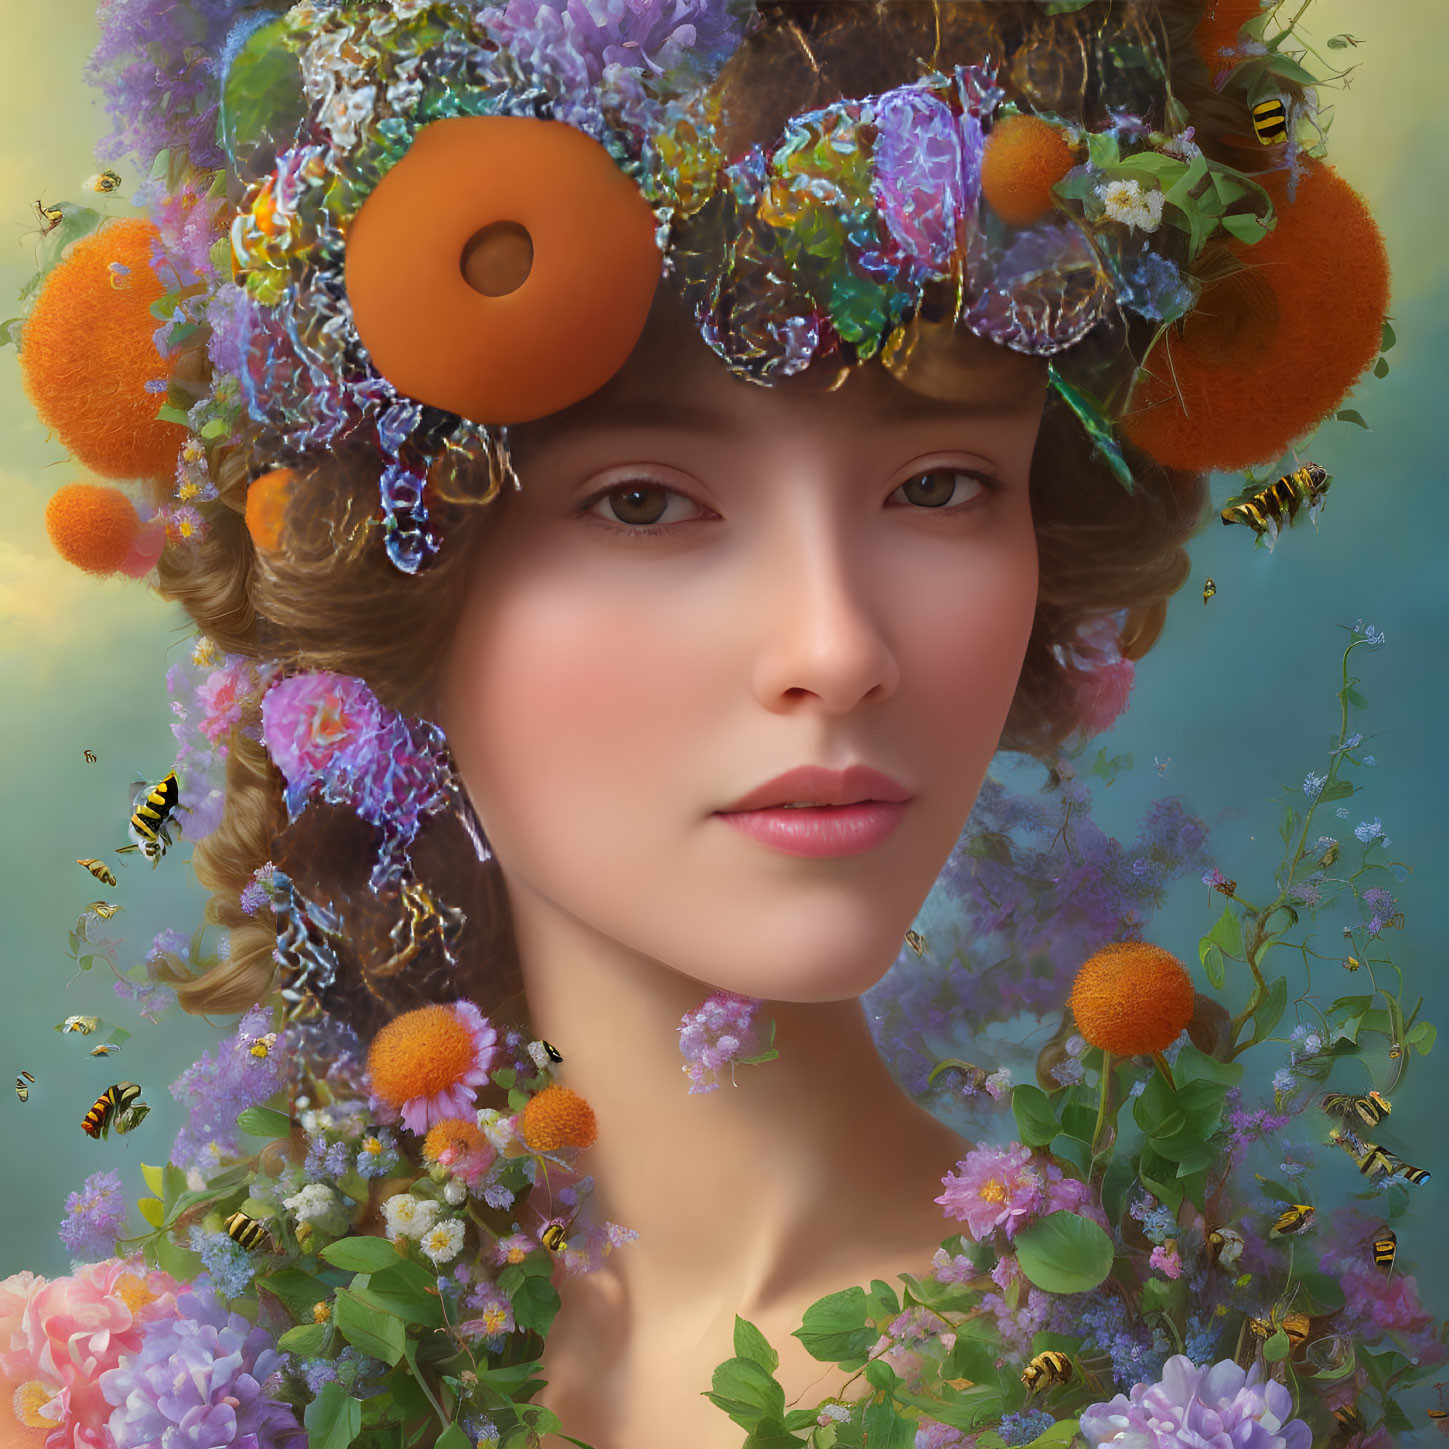 Naturalistic portrait of Queen of the bees